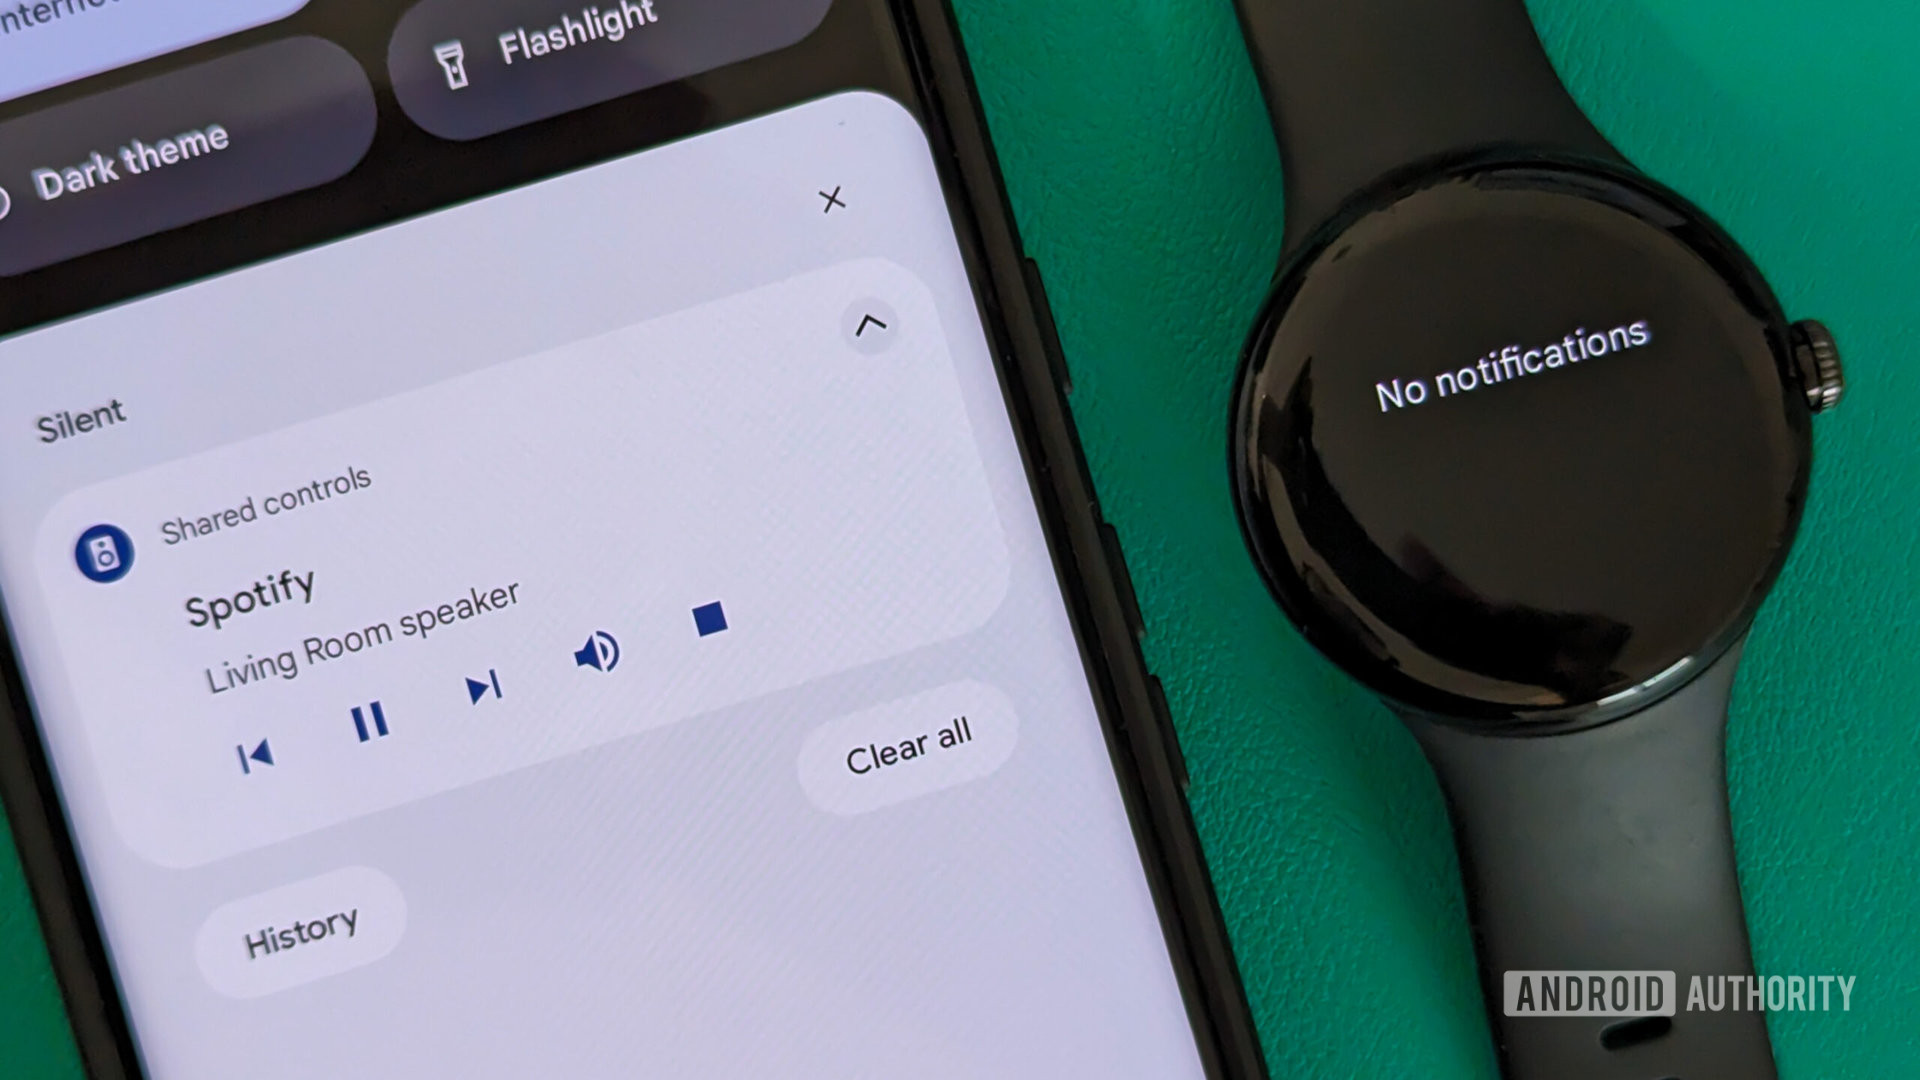 android shared cast controls notification pixel watch no notification